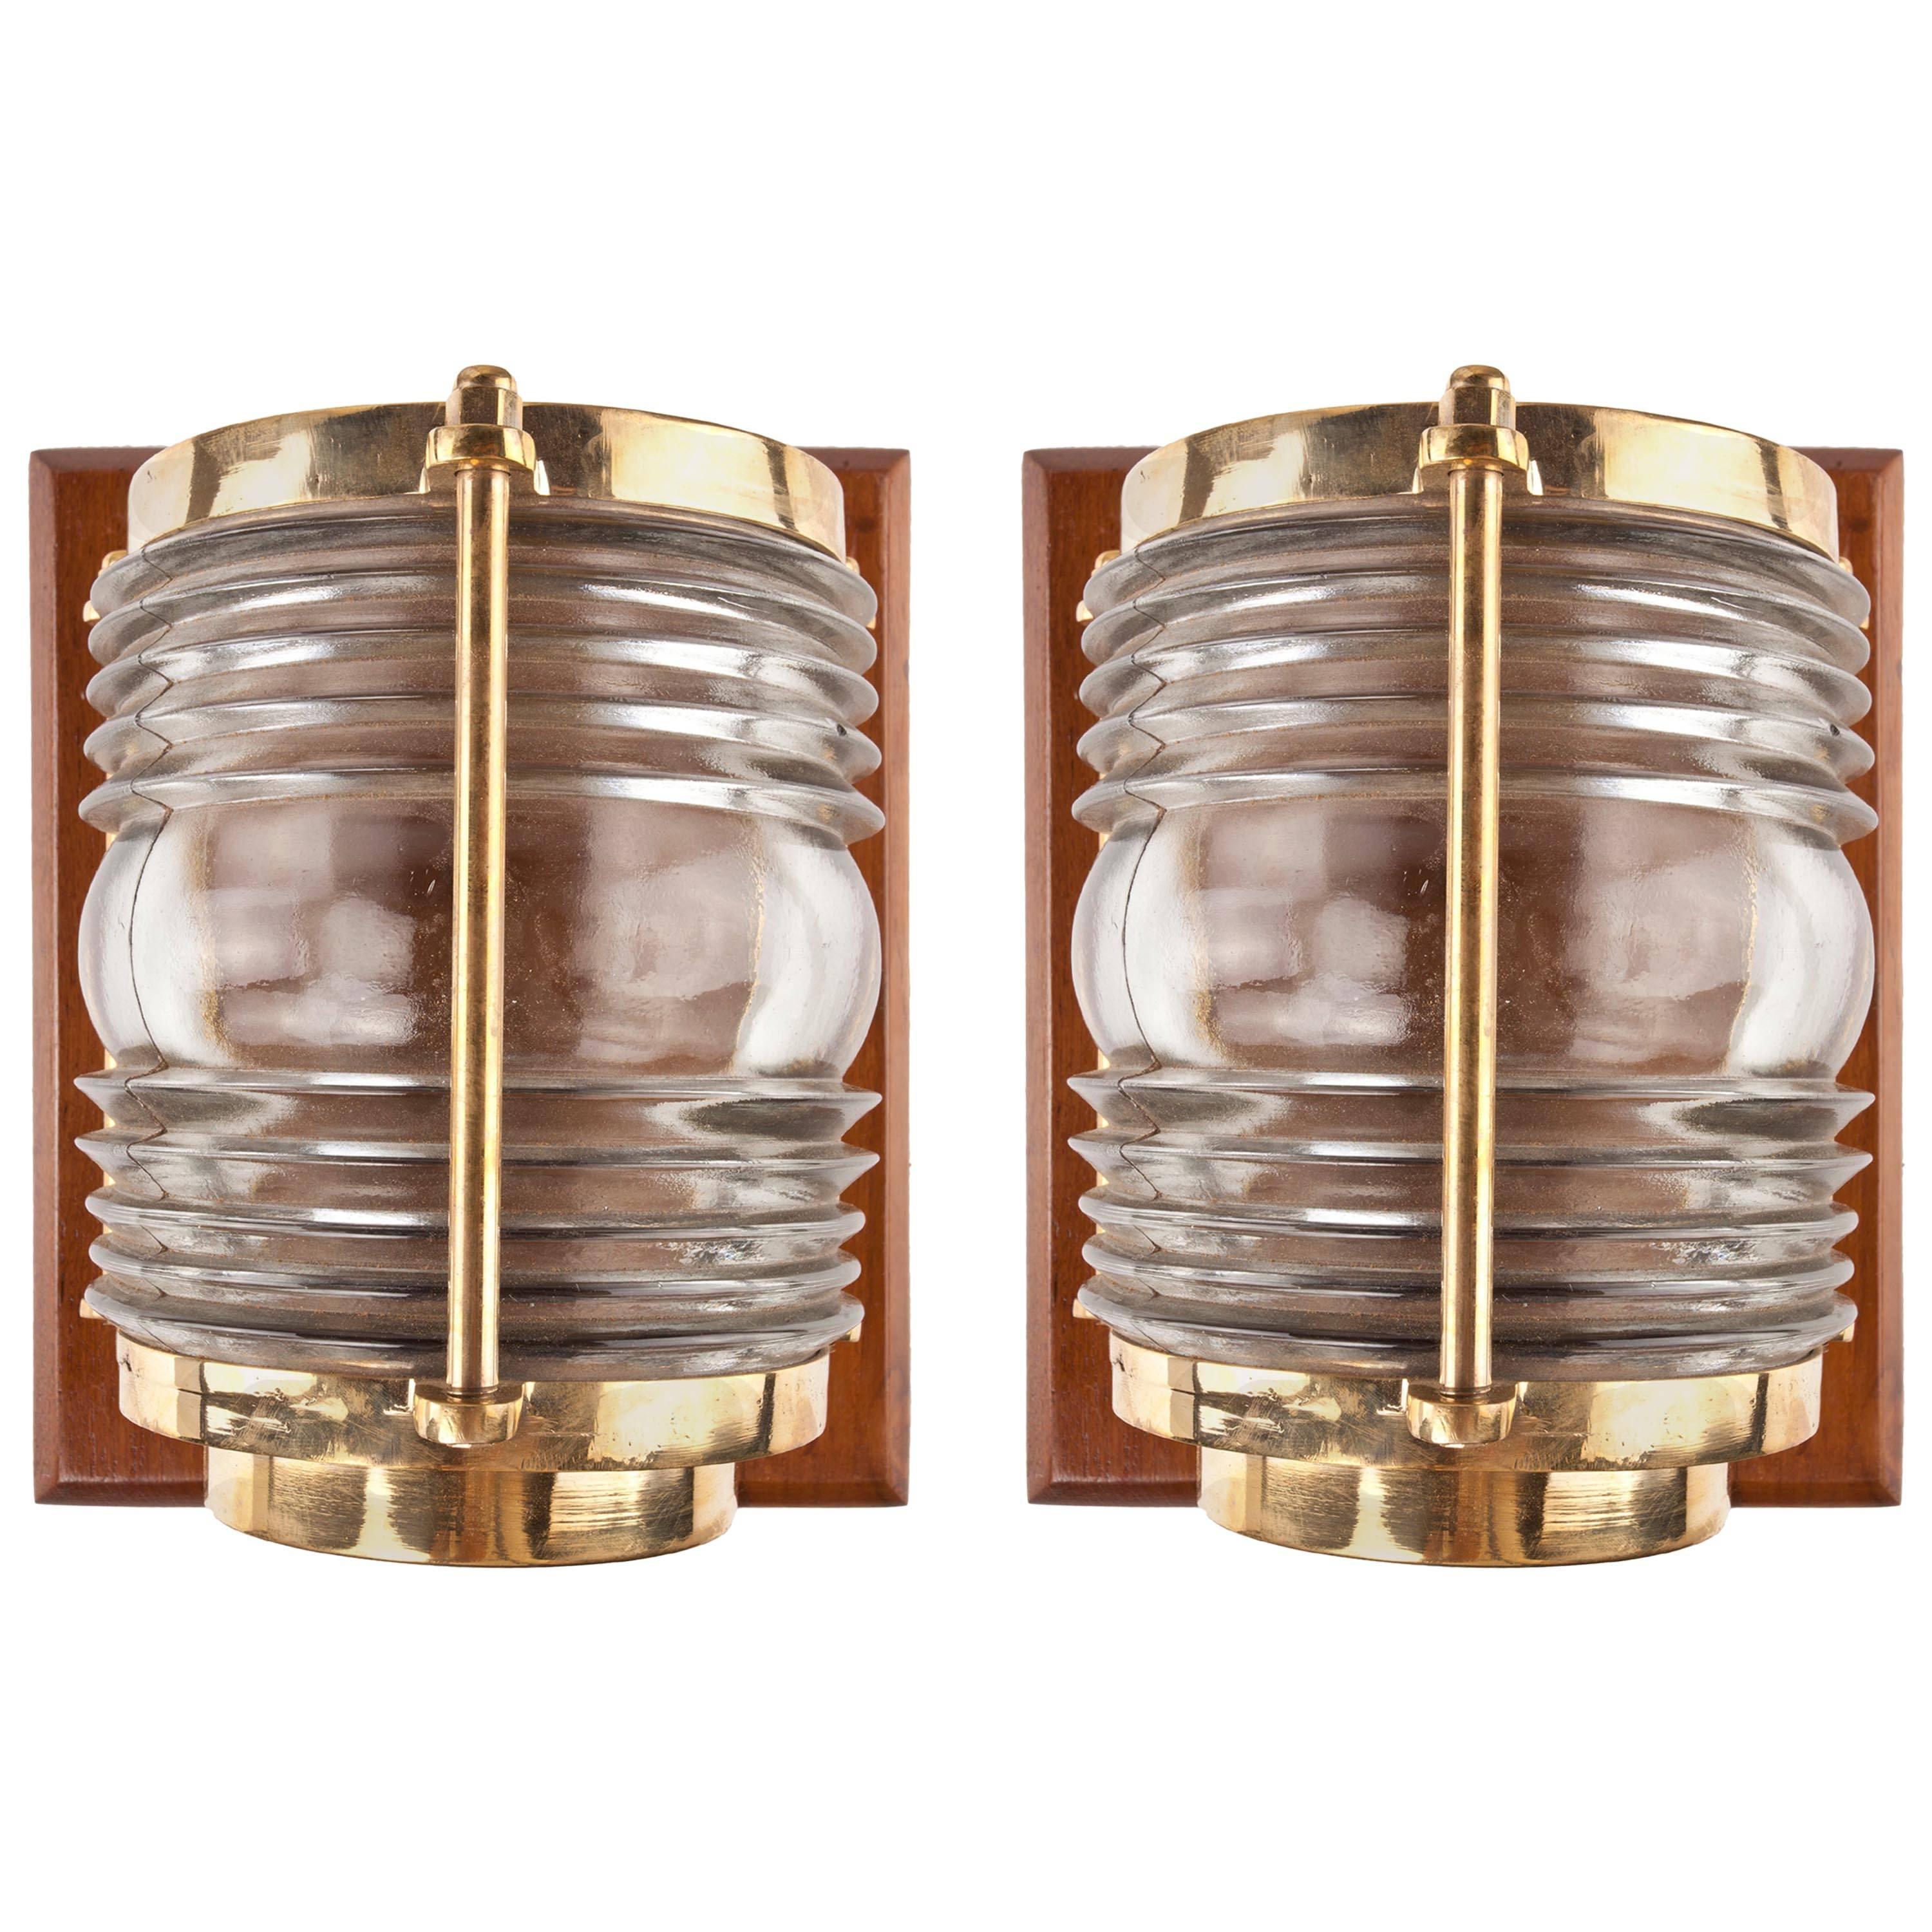 Pair of Nautical Ship's Post Lights with Fresnel Lens on Teak Backplate